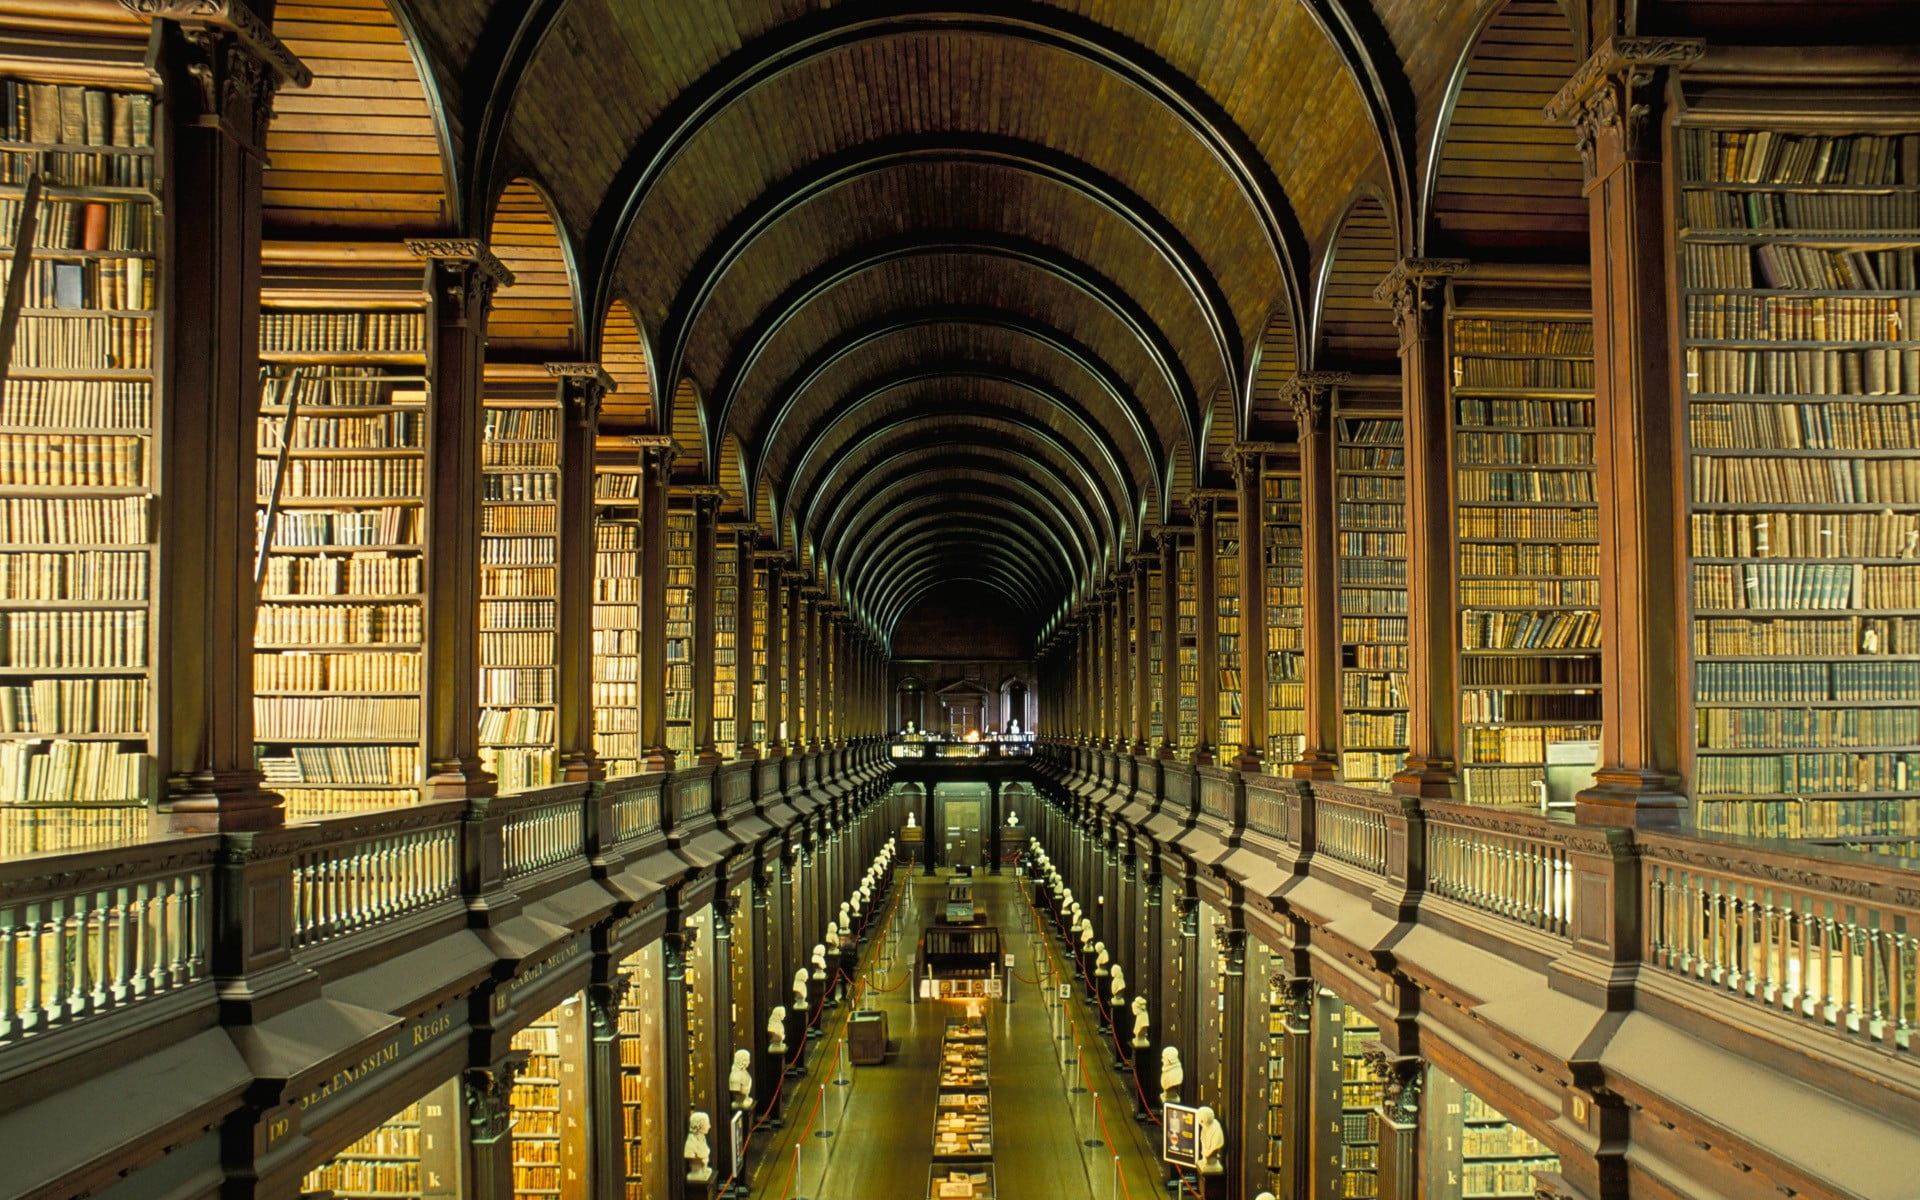 Assorted book lot, books, library, architecture, shelves, Ireland wallpaper